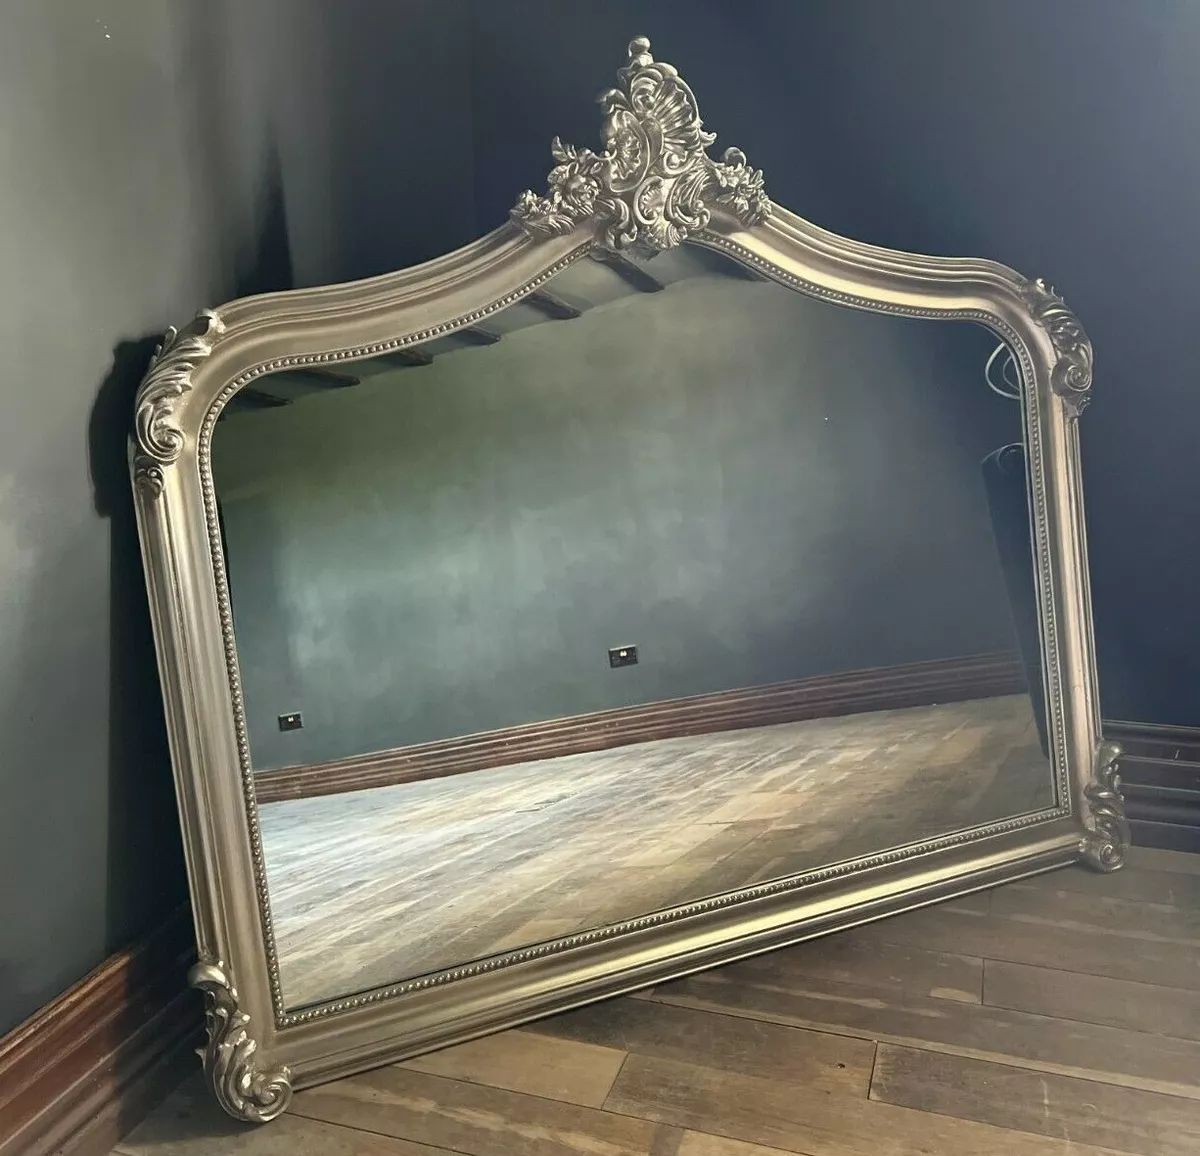 Large Antique Silver French Swept Ornate Period Over Mantle Arch Wall Mirror | eBay UK